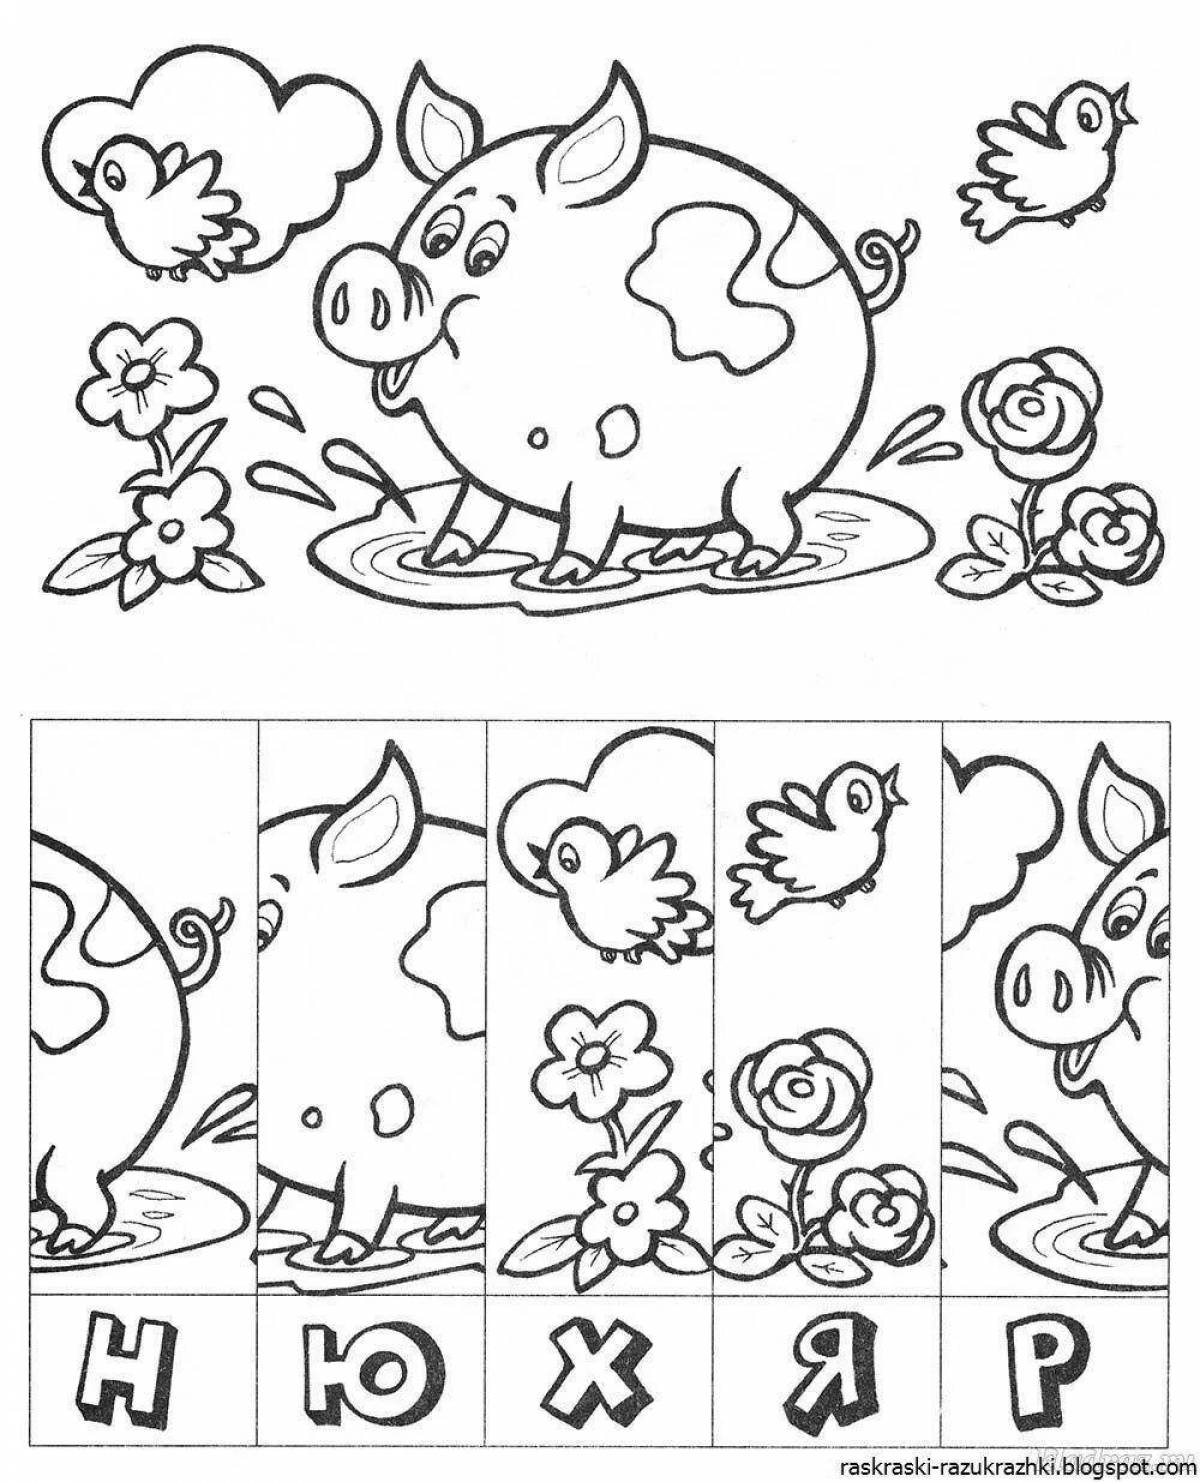 Great coloring in games for kids 5 years old puzzles